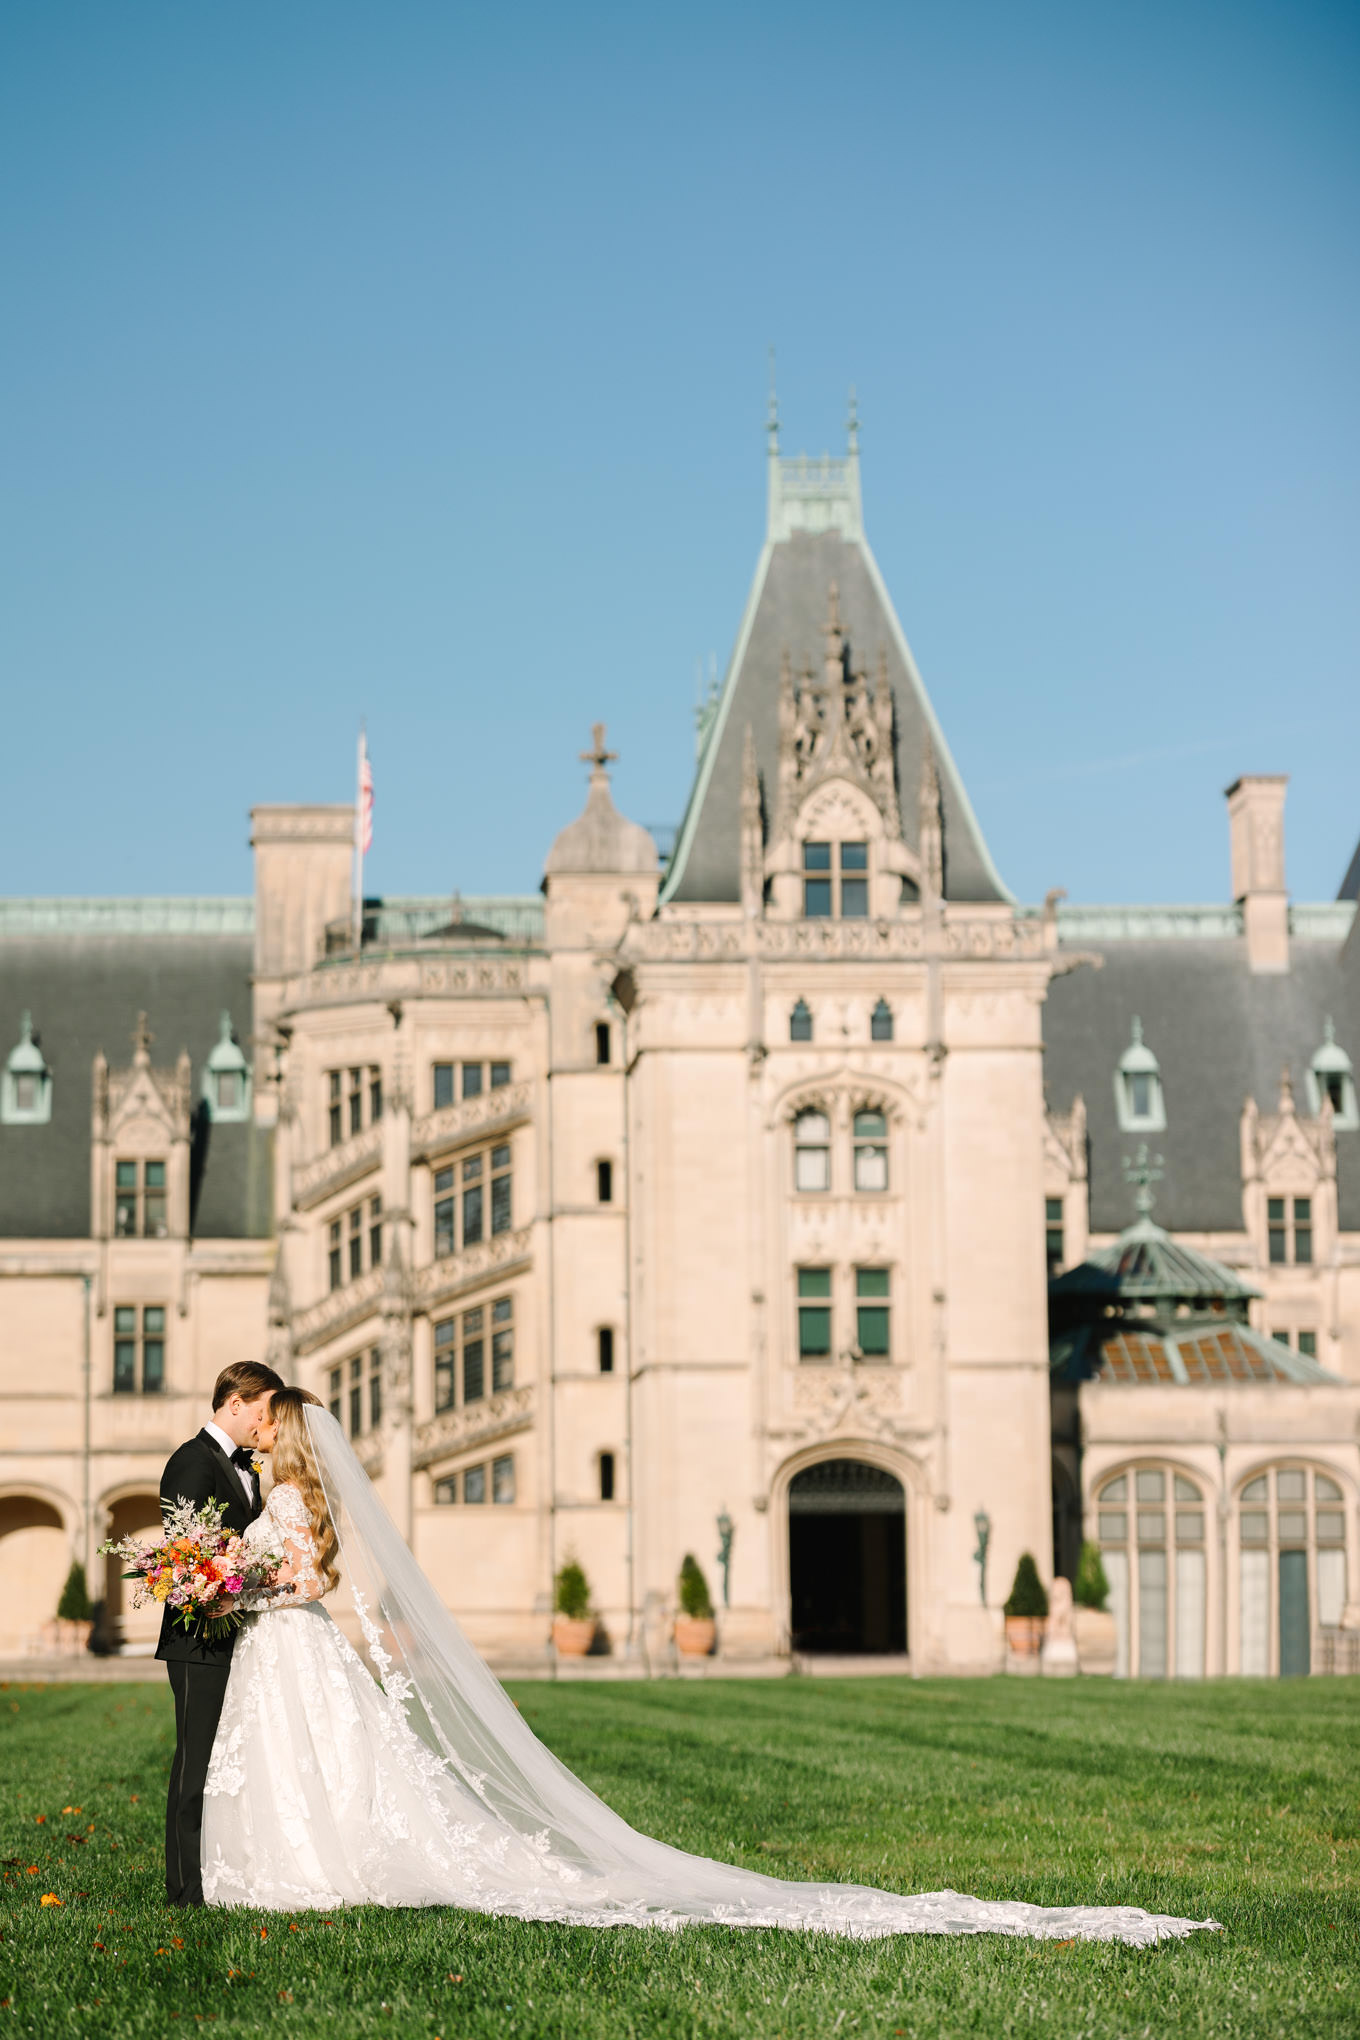 Biltmore Estate wedding in North Carolina | Wedding and elopement photography roundup | Los Angeles and Palm Springs photographer | #losangeleswedding #palmspringswedding #elopementphotographer Source: Mary Costa Photography | Los Angeles